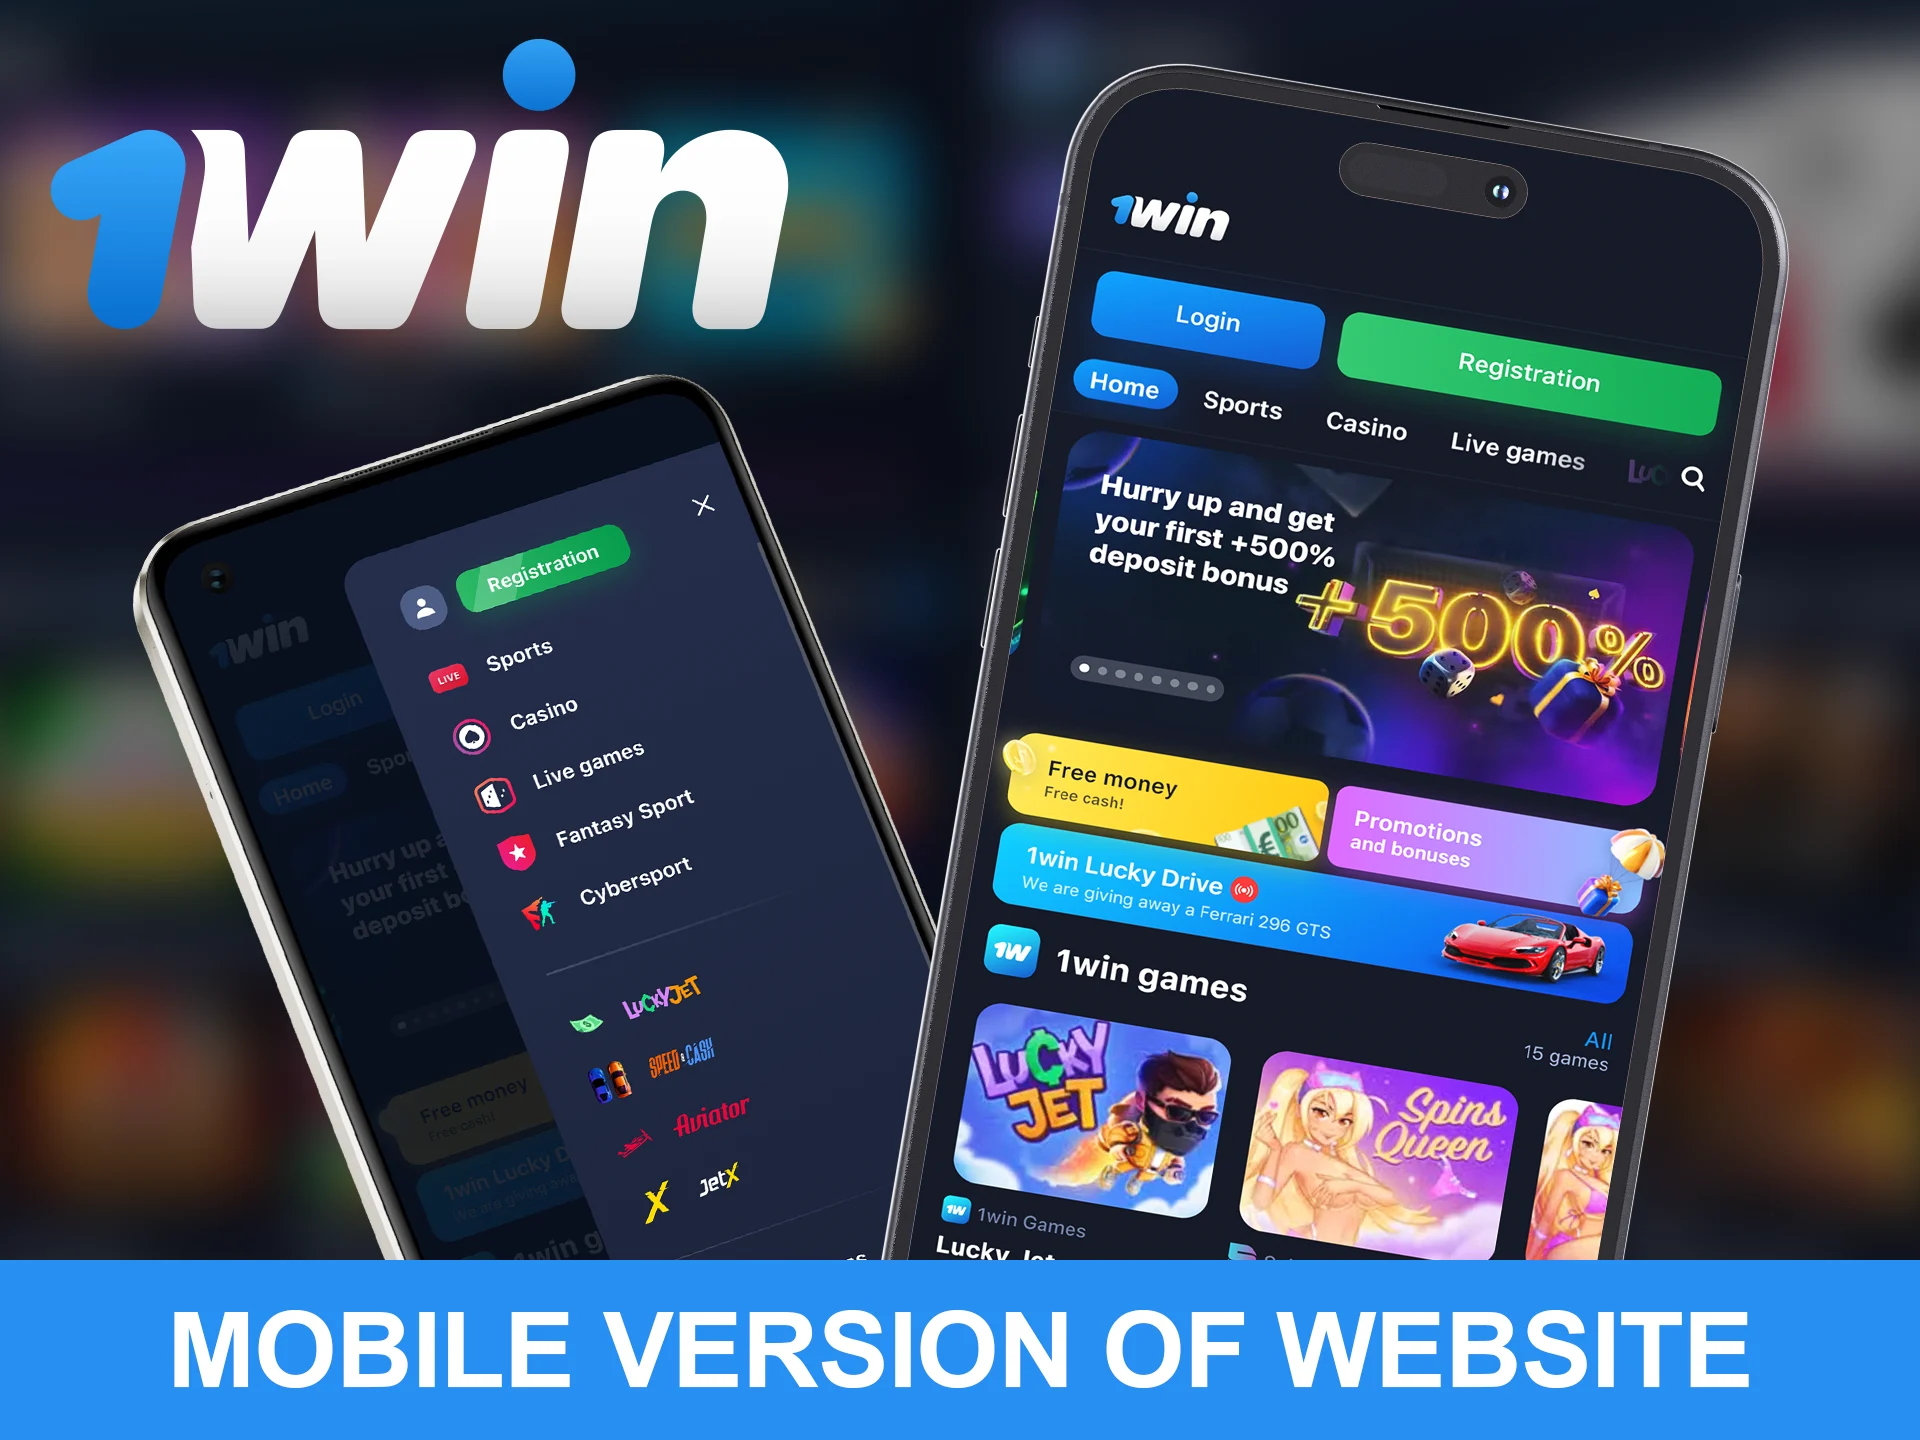 The mobile version of the 1win website is available on iOS and Android devices.